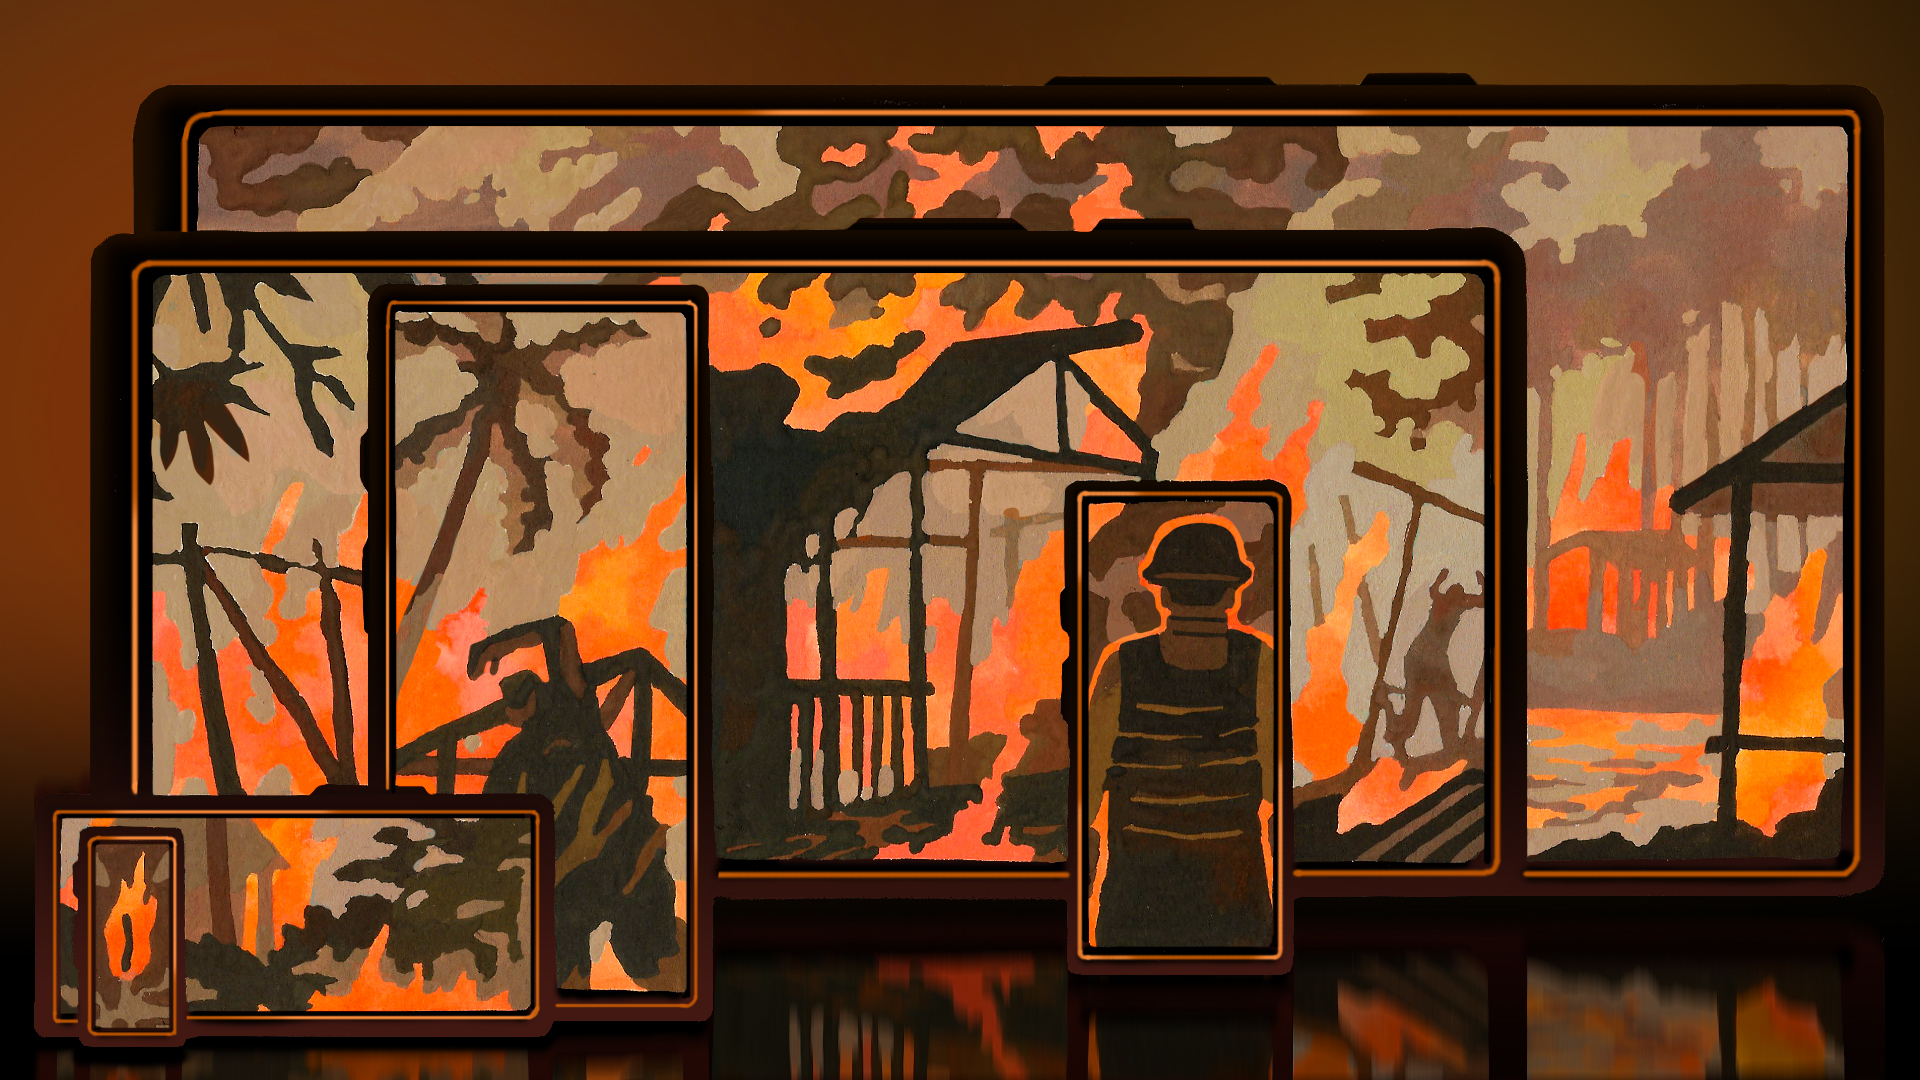 An illustration of a soldier looking out at burned trees and building wreckage with bright orange flames. This scene is all contained within a stack of digital devices.